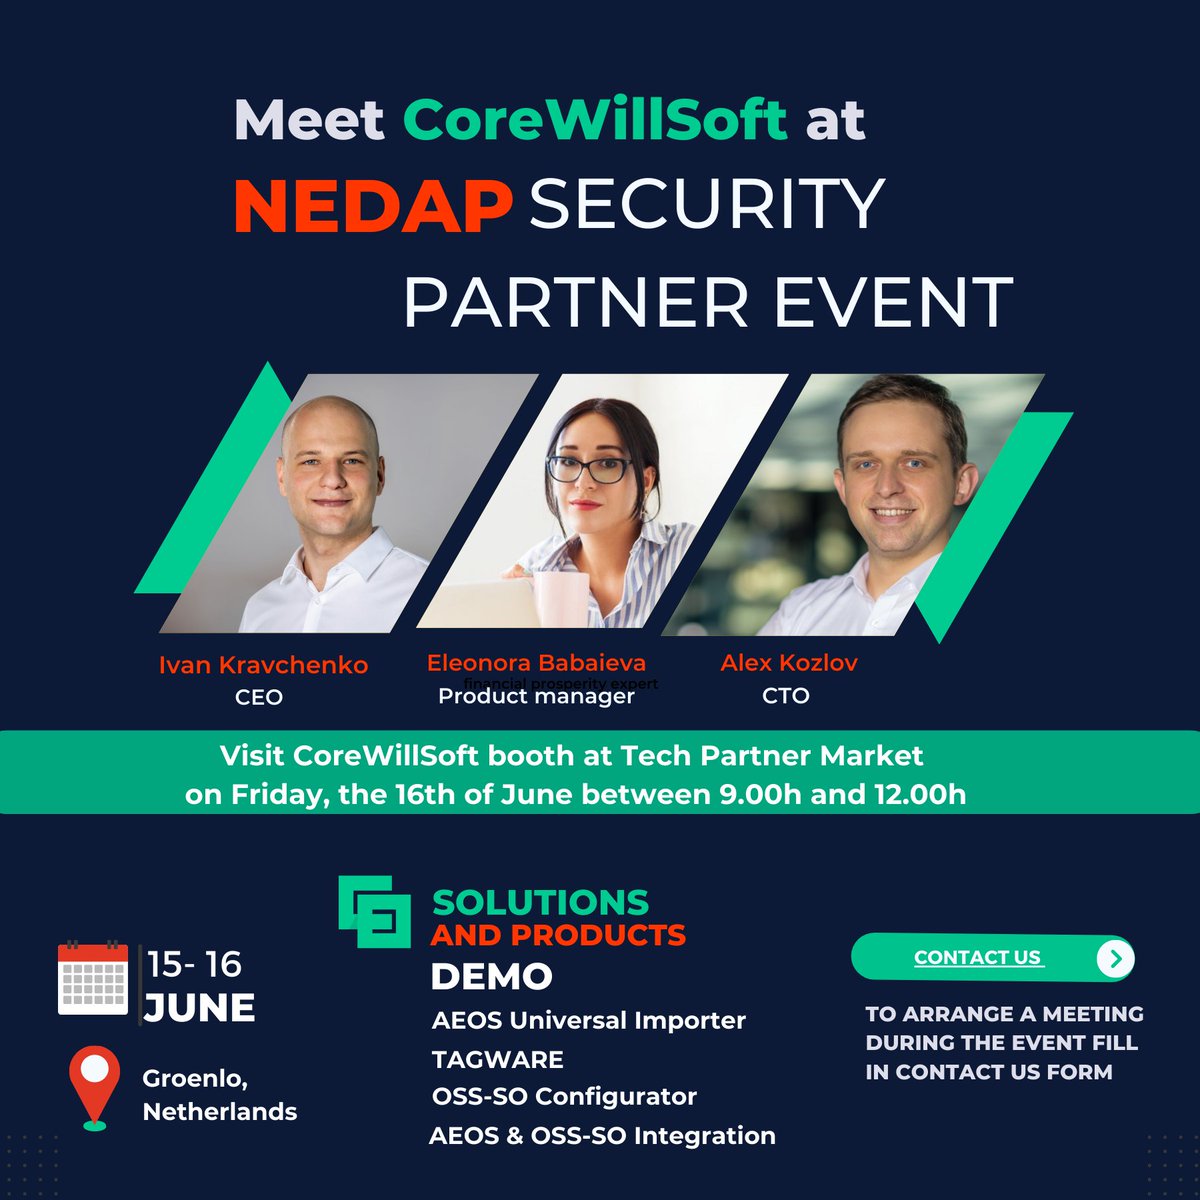 Exciting news! We are thrilled to announce that we will be exhibiting at the Nedap Security Partner Event on June 15th-16th, 2023 in Groenlo, Netherlands.

#CoreWillSoft #NedapSecurityPartnerEvent #InnovationInSecurity